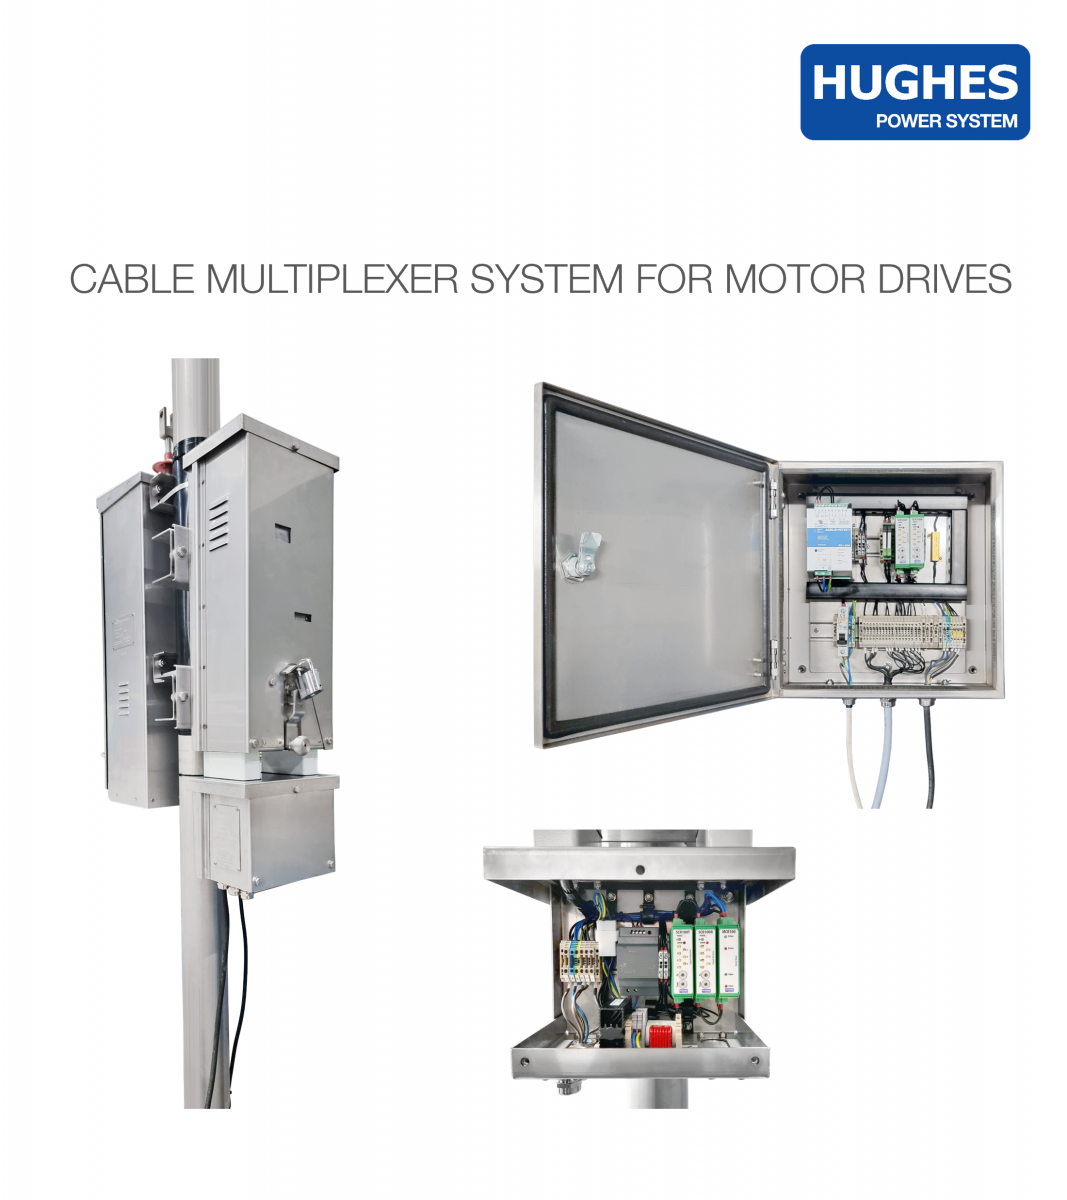 New product! Cable multiplexer system